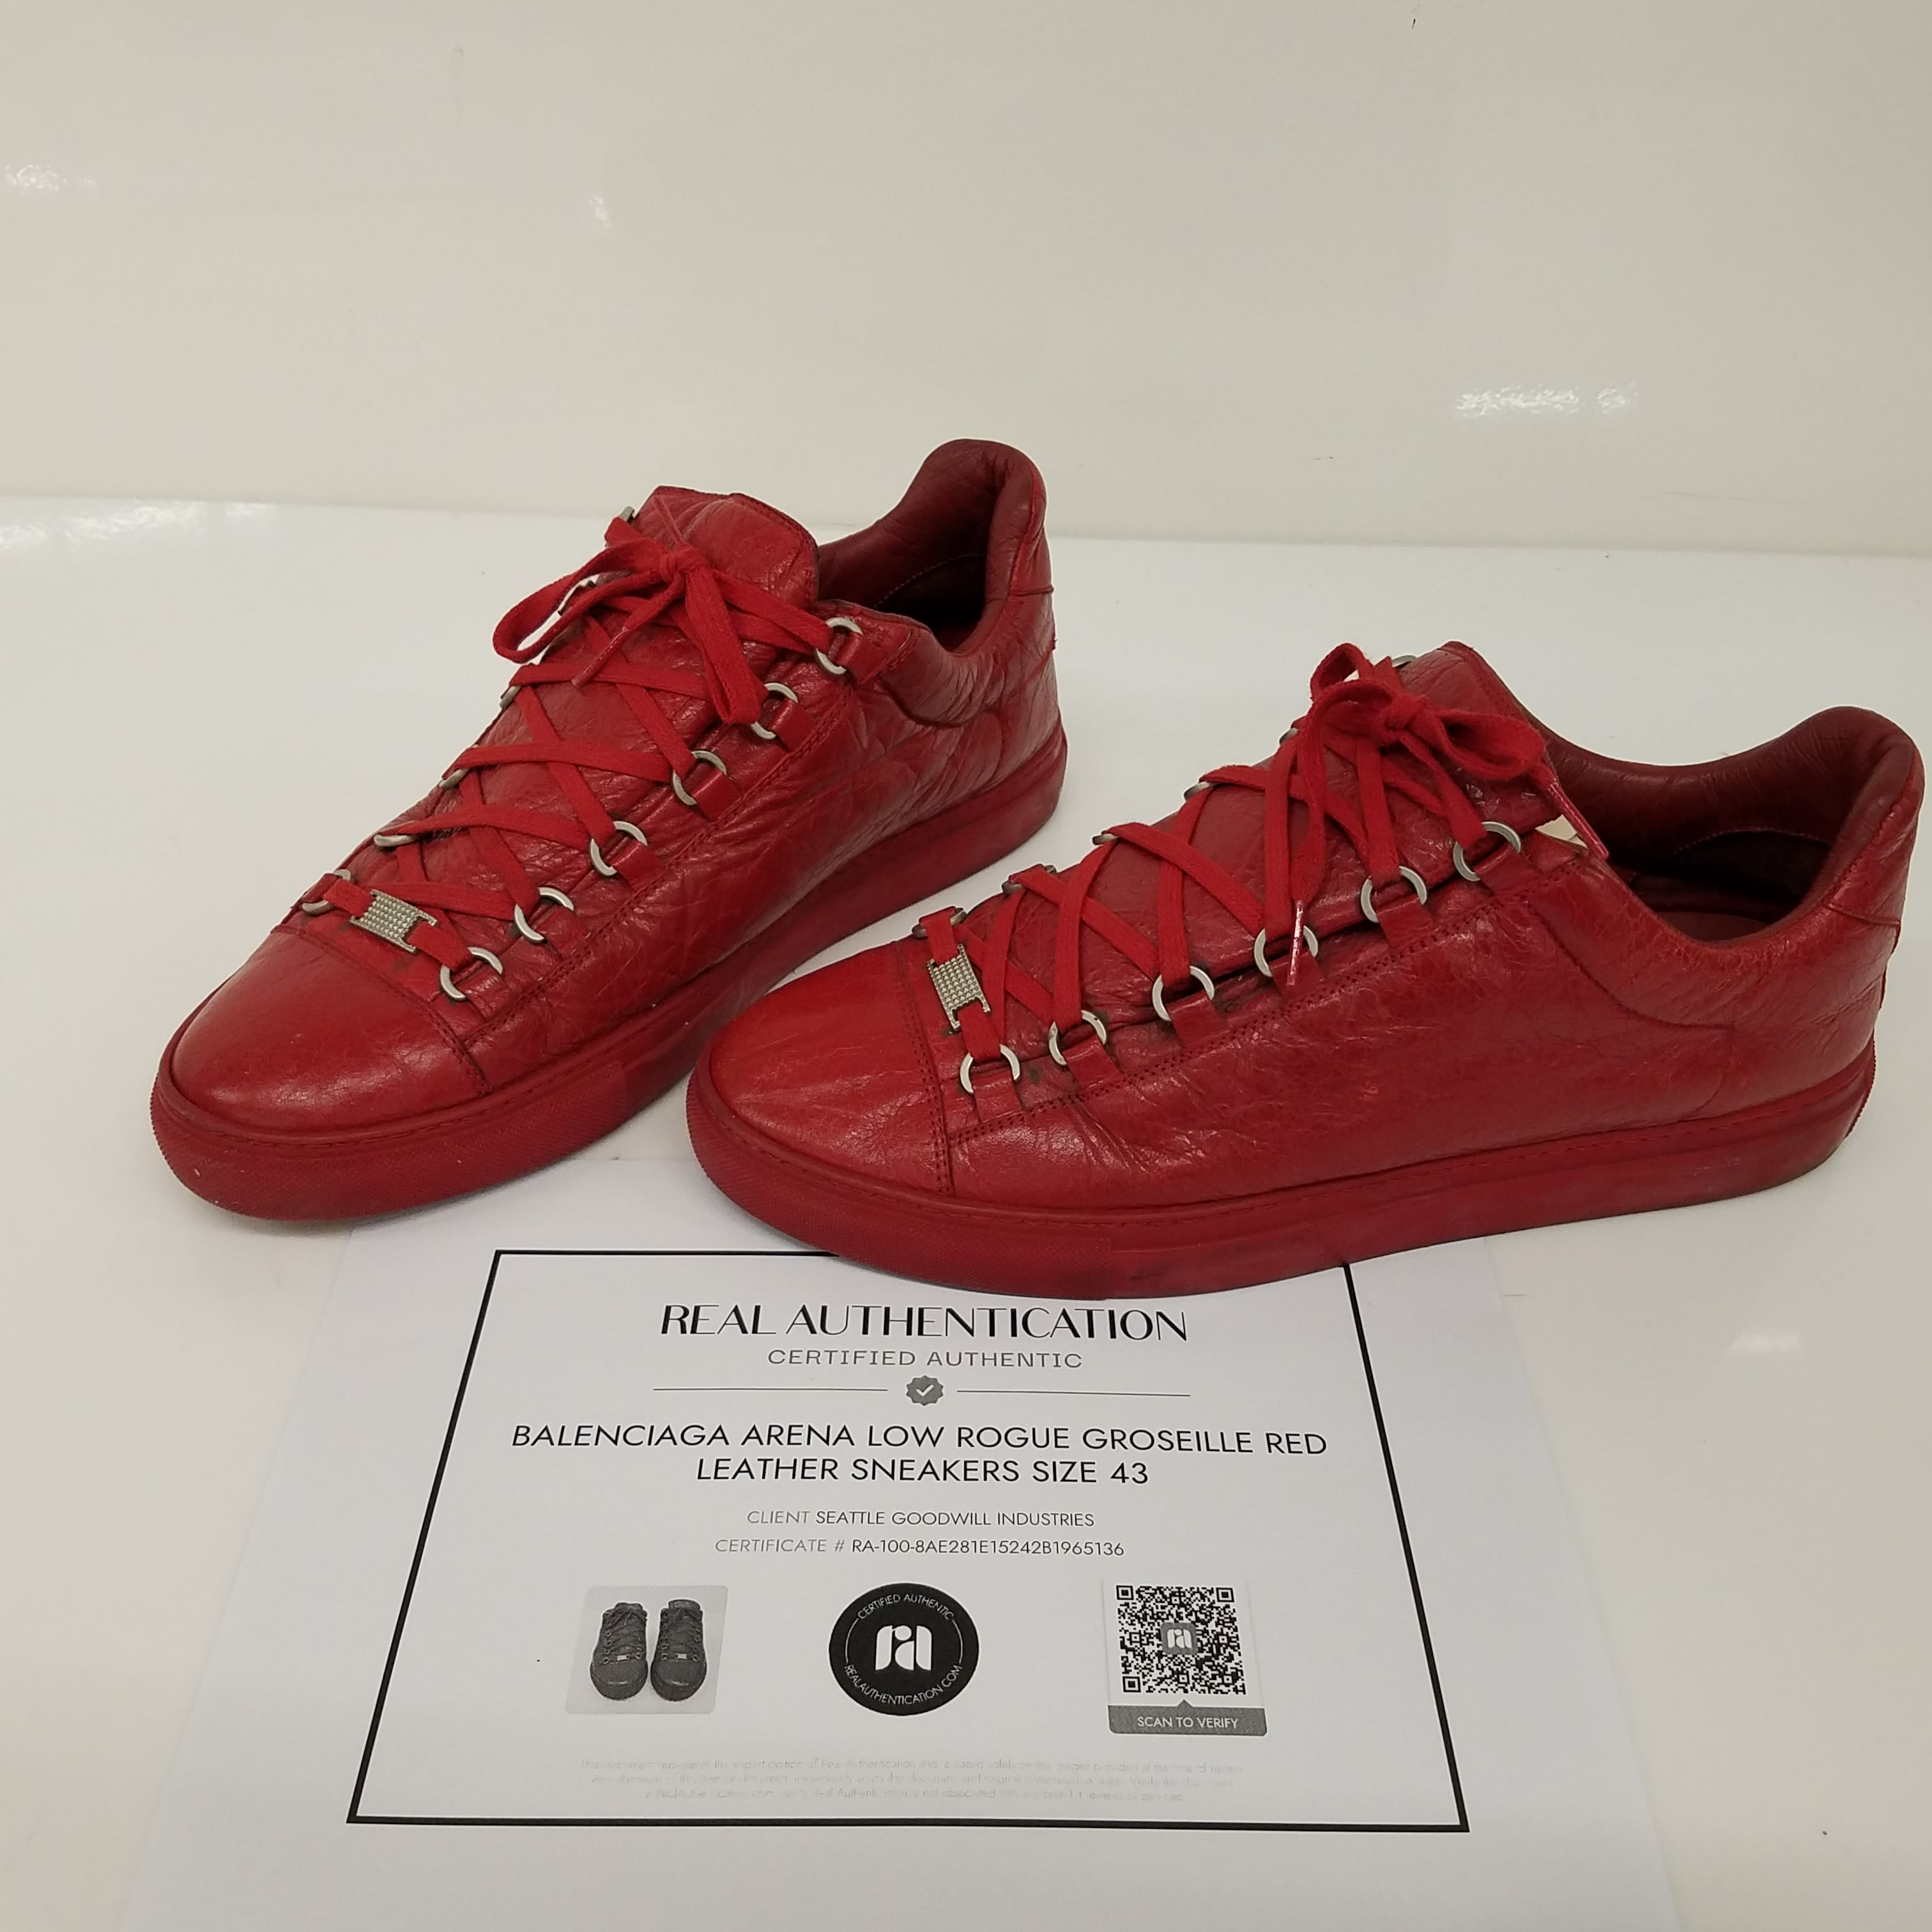 Buy the Balenciaga Arena Low Groseille Red Leather Sneakers Men's Size 9 | GoodwillFinds